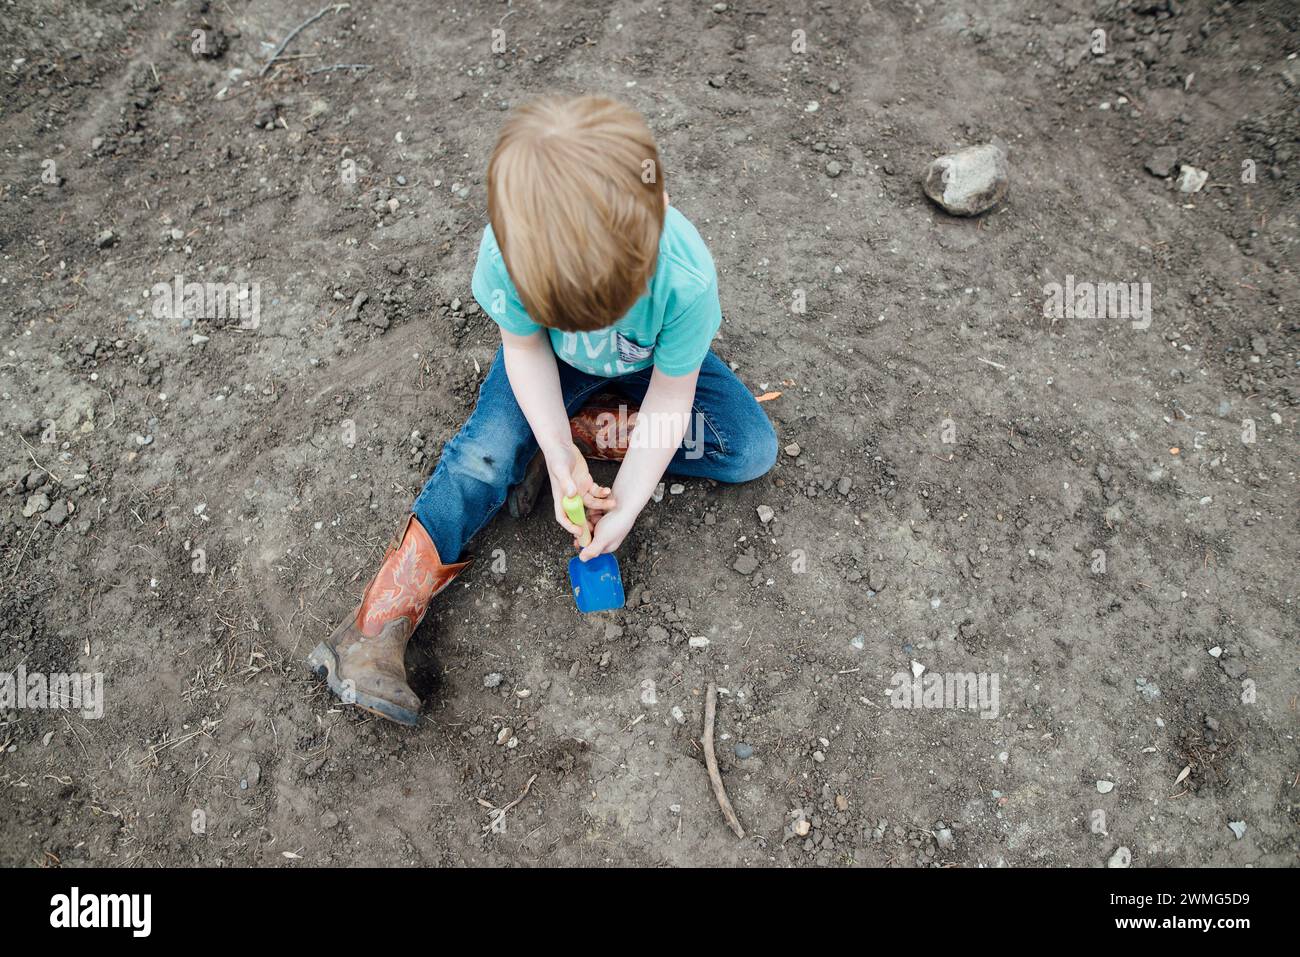 Overhead view of young boy sitting in dirt using a small shovel Stock Photo